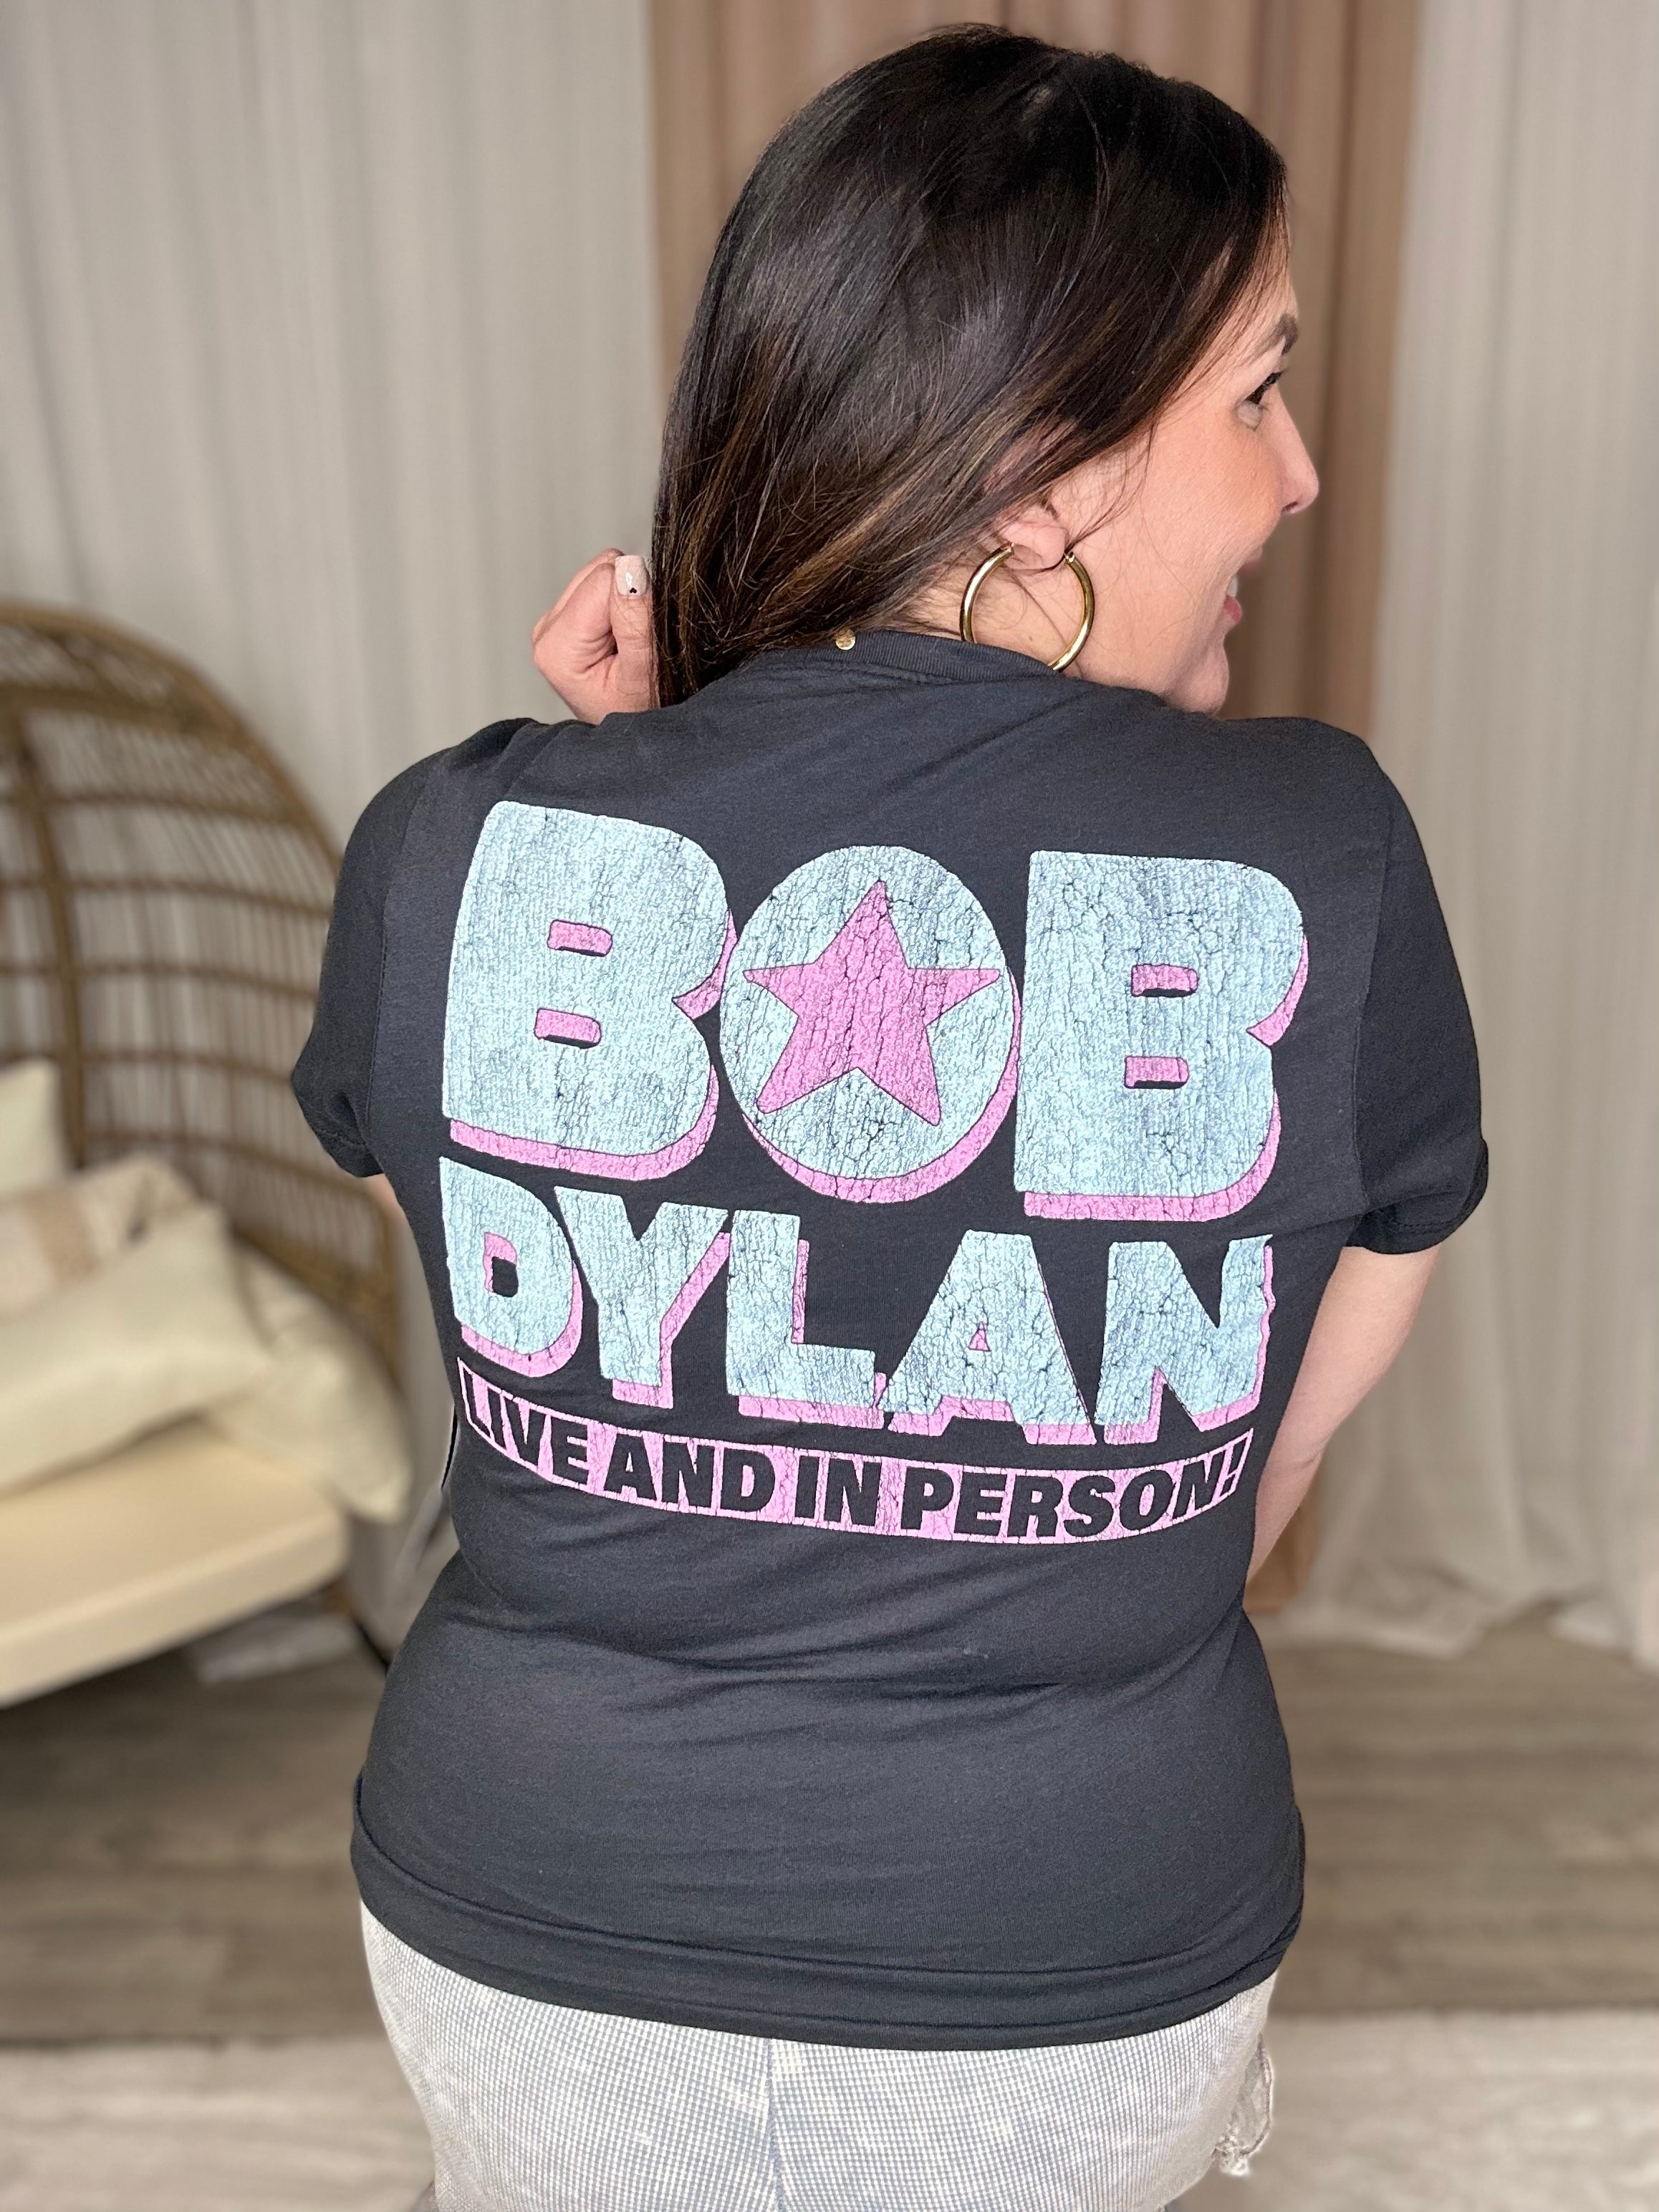 Bob Dylan Forest Hills Graphic Tee-130 Graphic Tees-Prince Peter-Heathered Boho Boutique, Women's Fashion and Accessories in Palmetto, FL